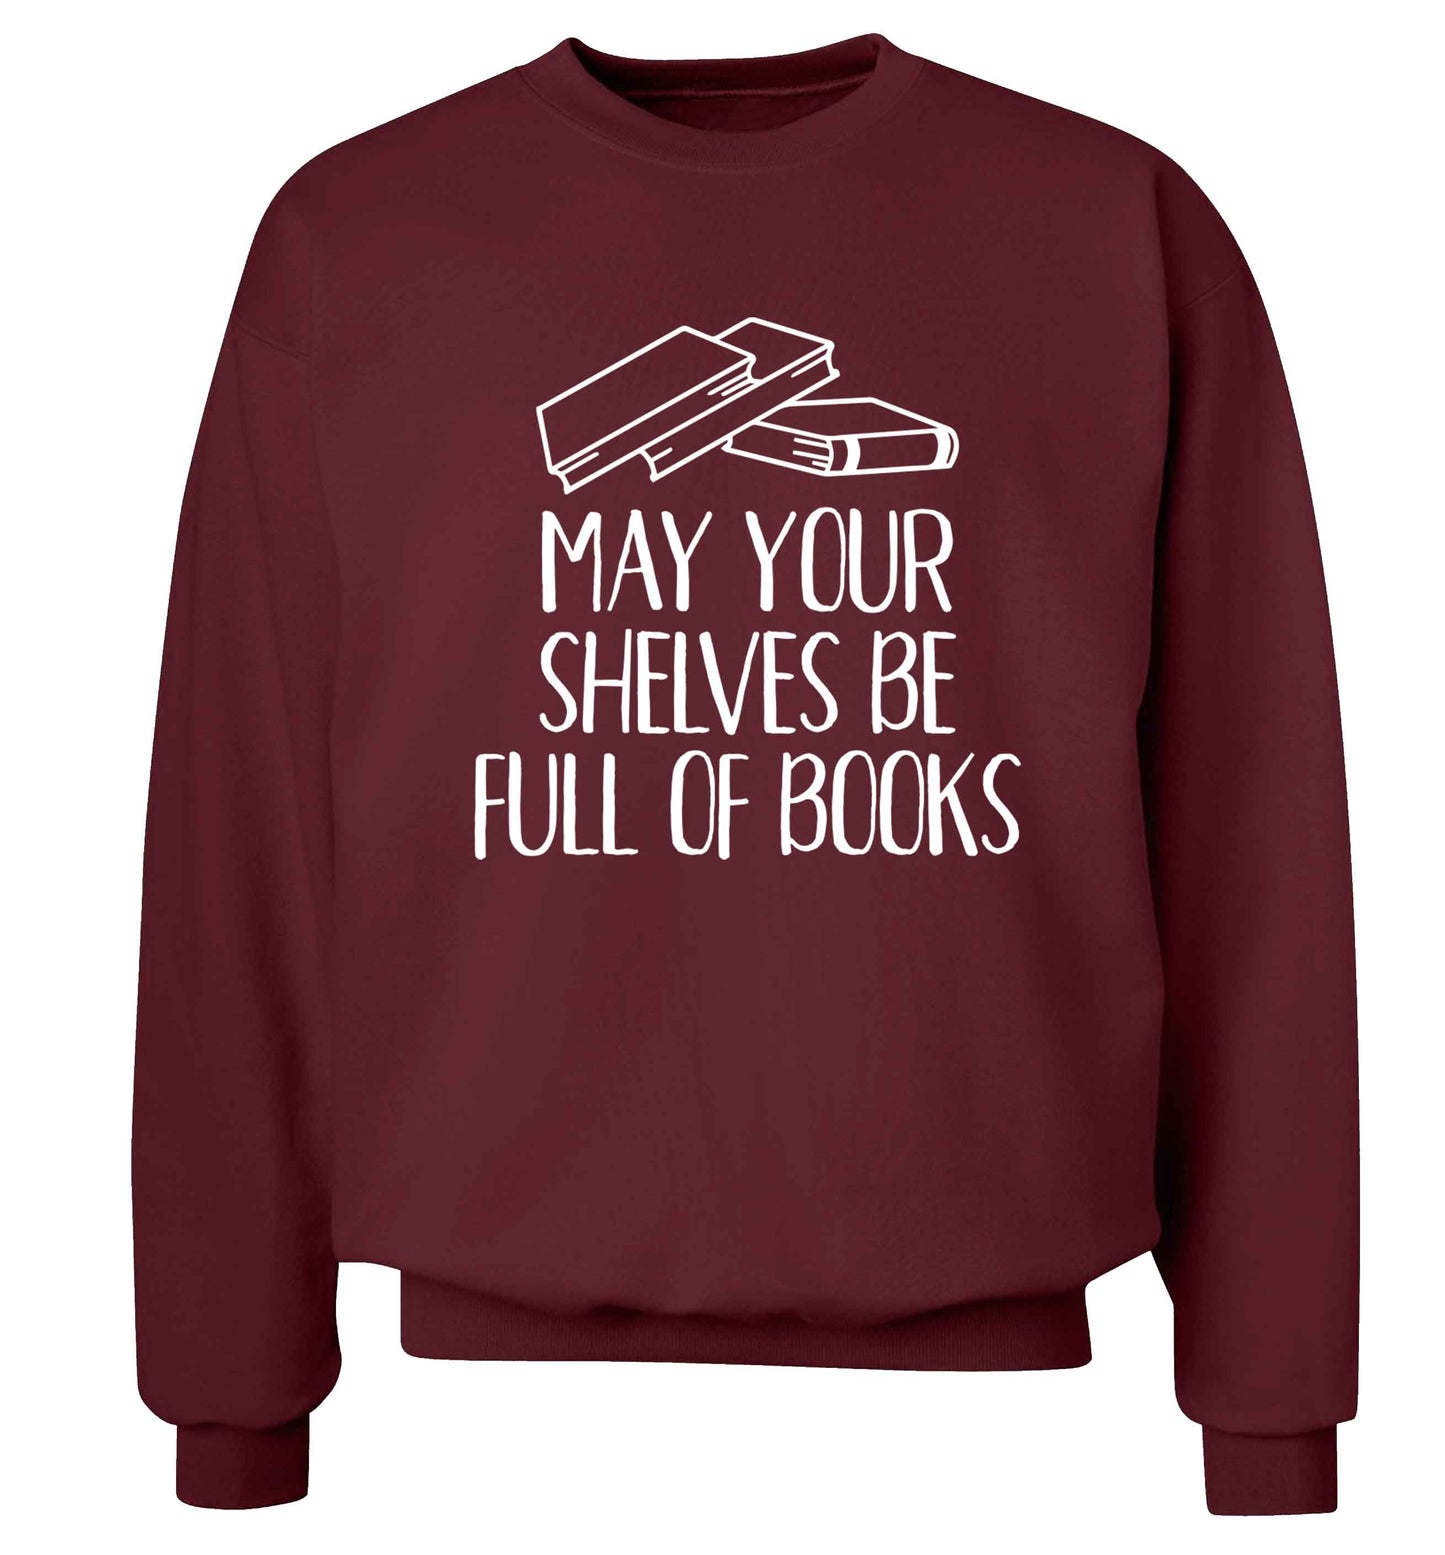 May your shelves be full of books Adult's unisex maroon Sweater 2XL